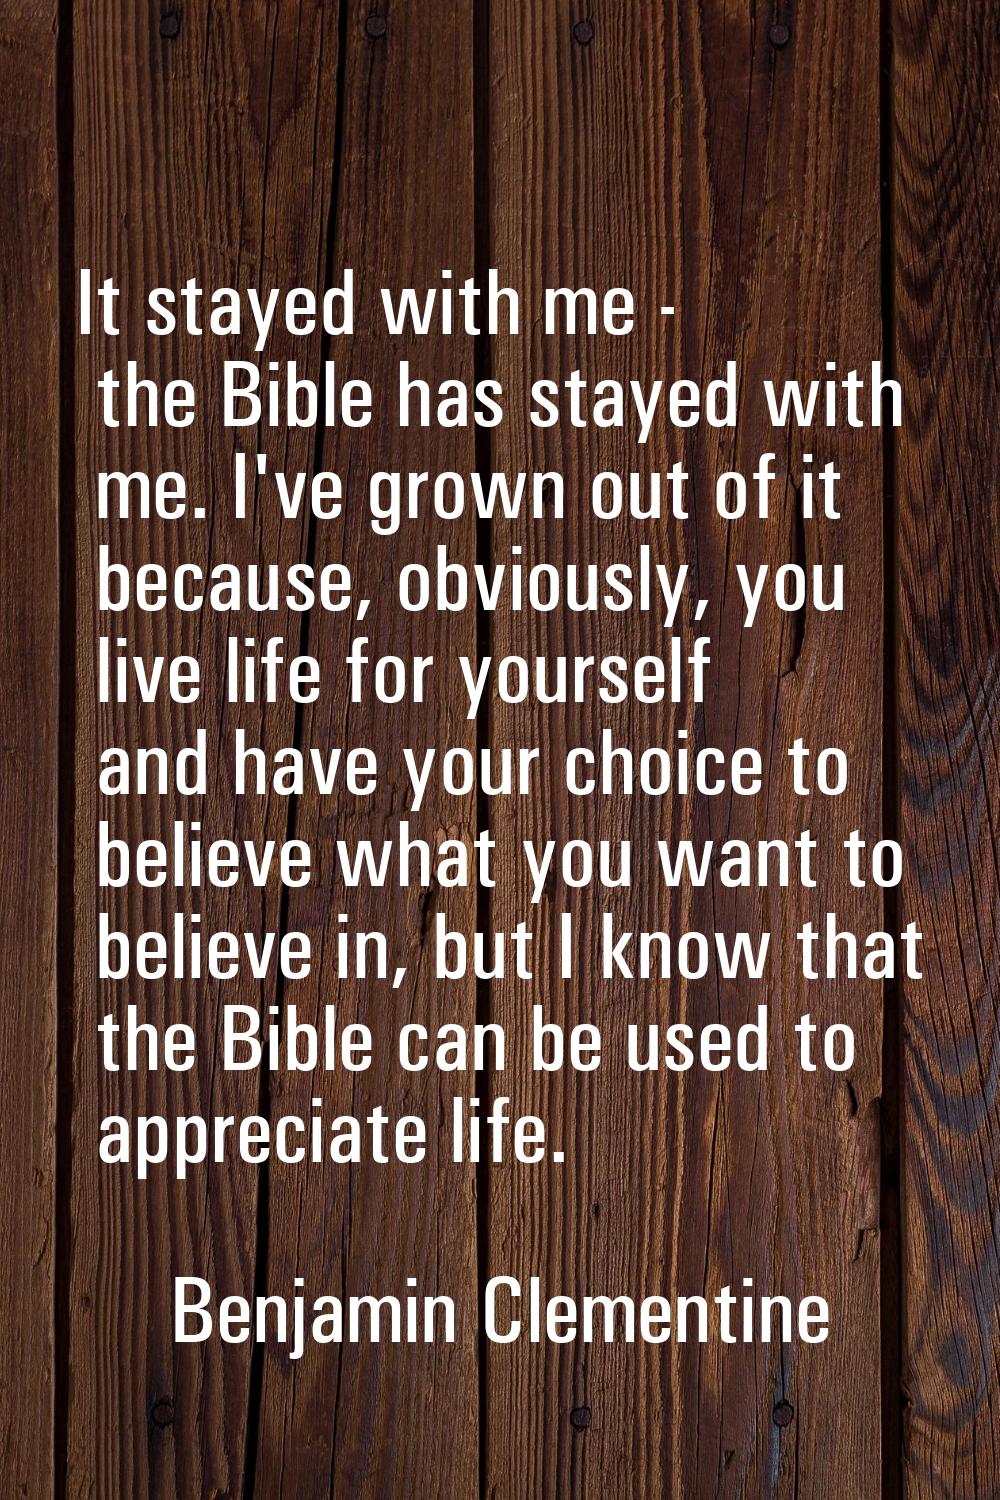 It stayed with me - the Bible has stayed with me. I've grown out of it because, obviously, you live